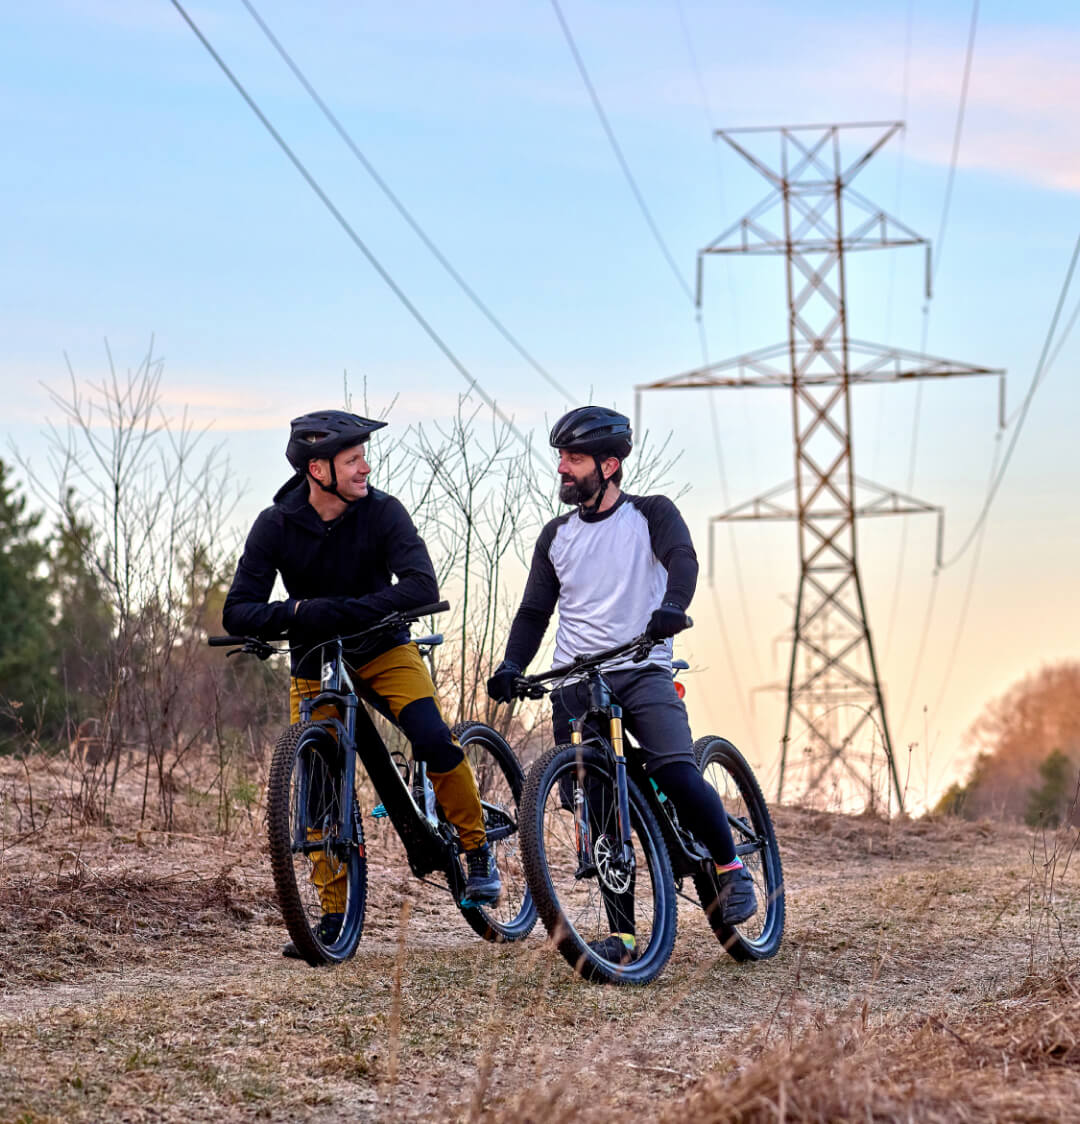 Two people on bikes talking in front of a transmission tower